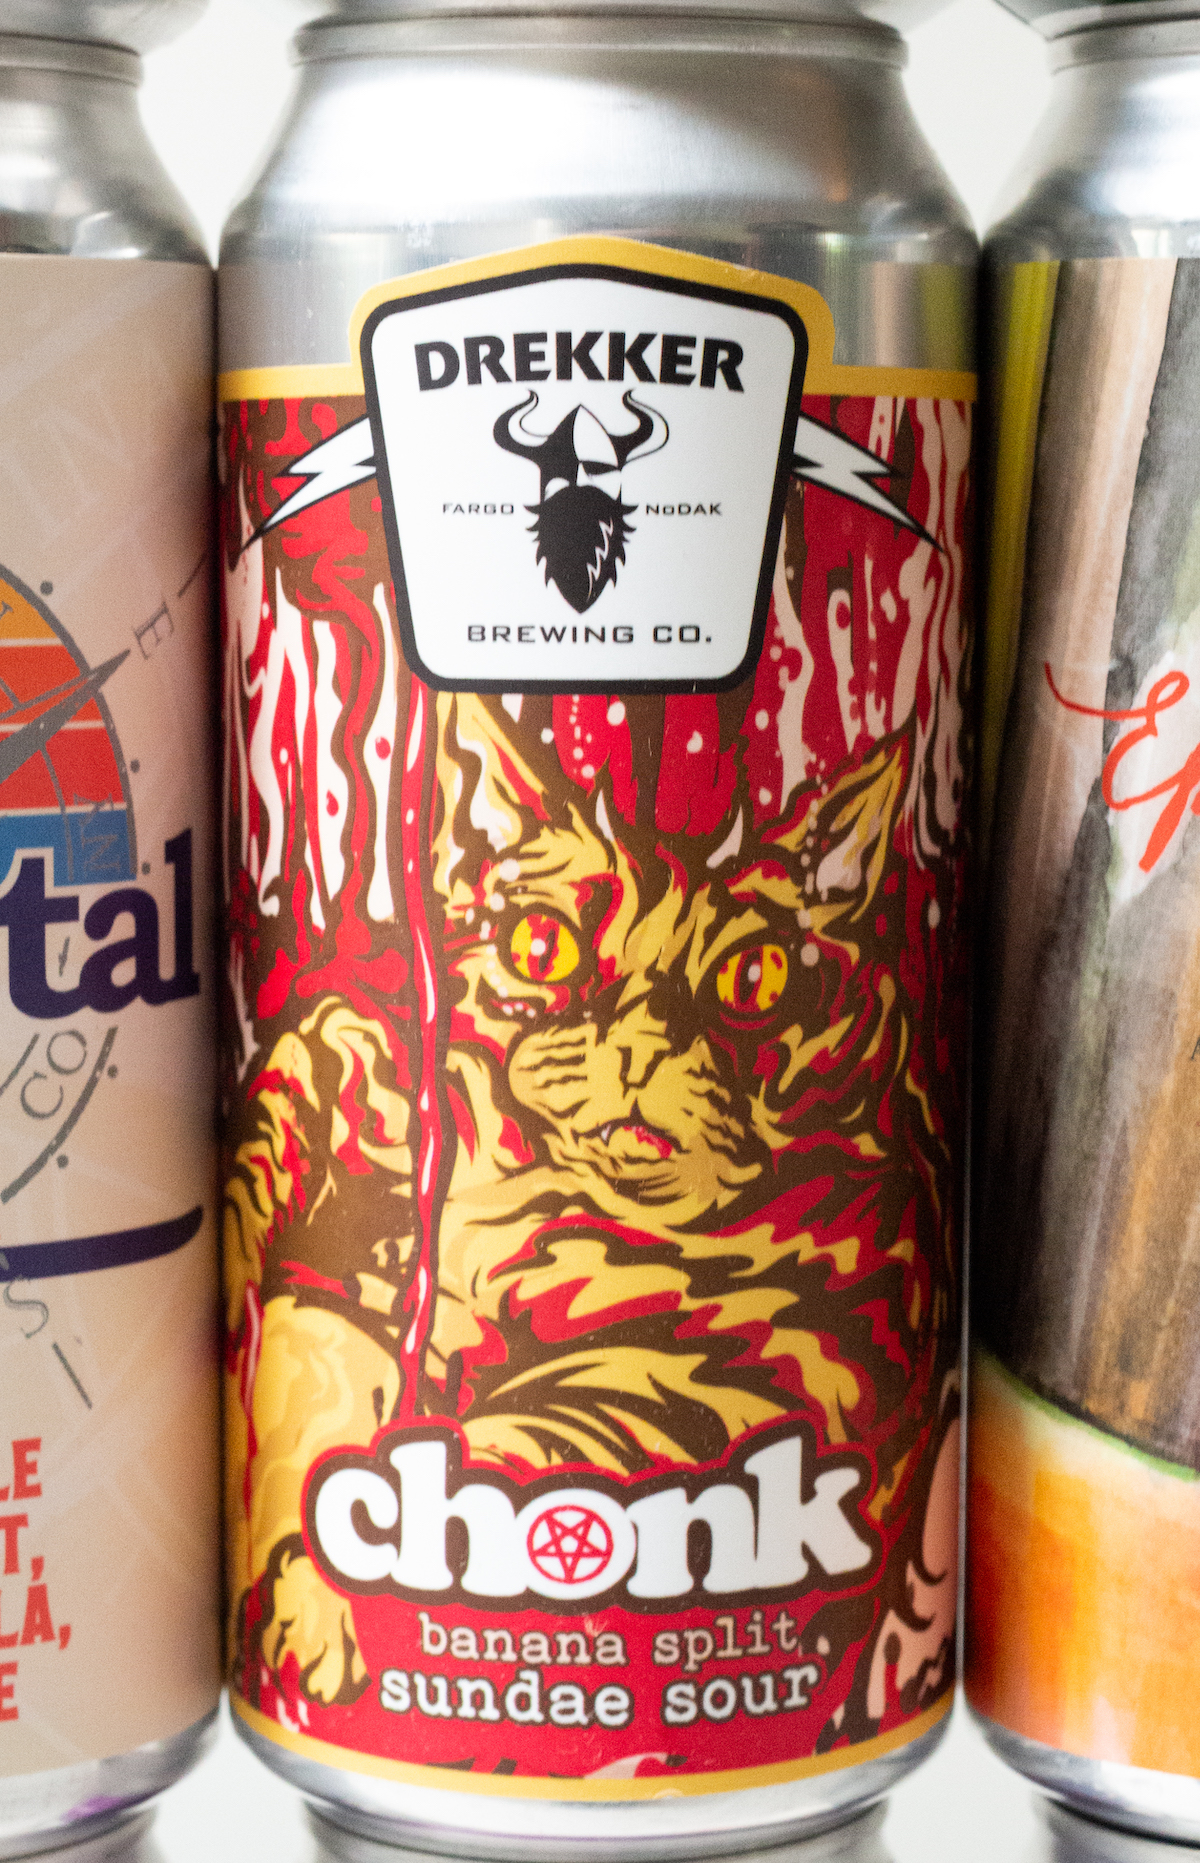 Close up of a can of "Chonk" by Drekker sour beer. The label is hues of red, yellow, and brown and features a drawing of a cat.